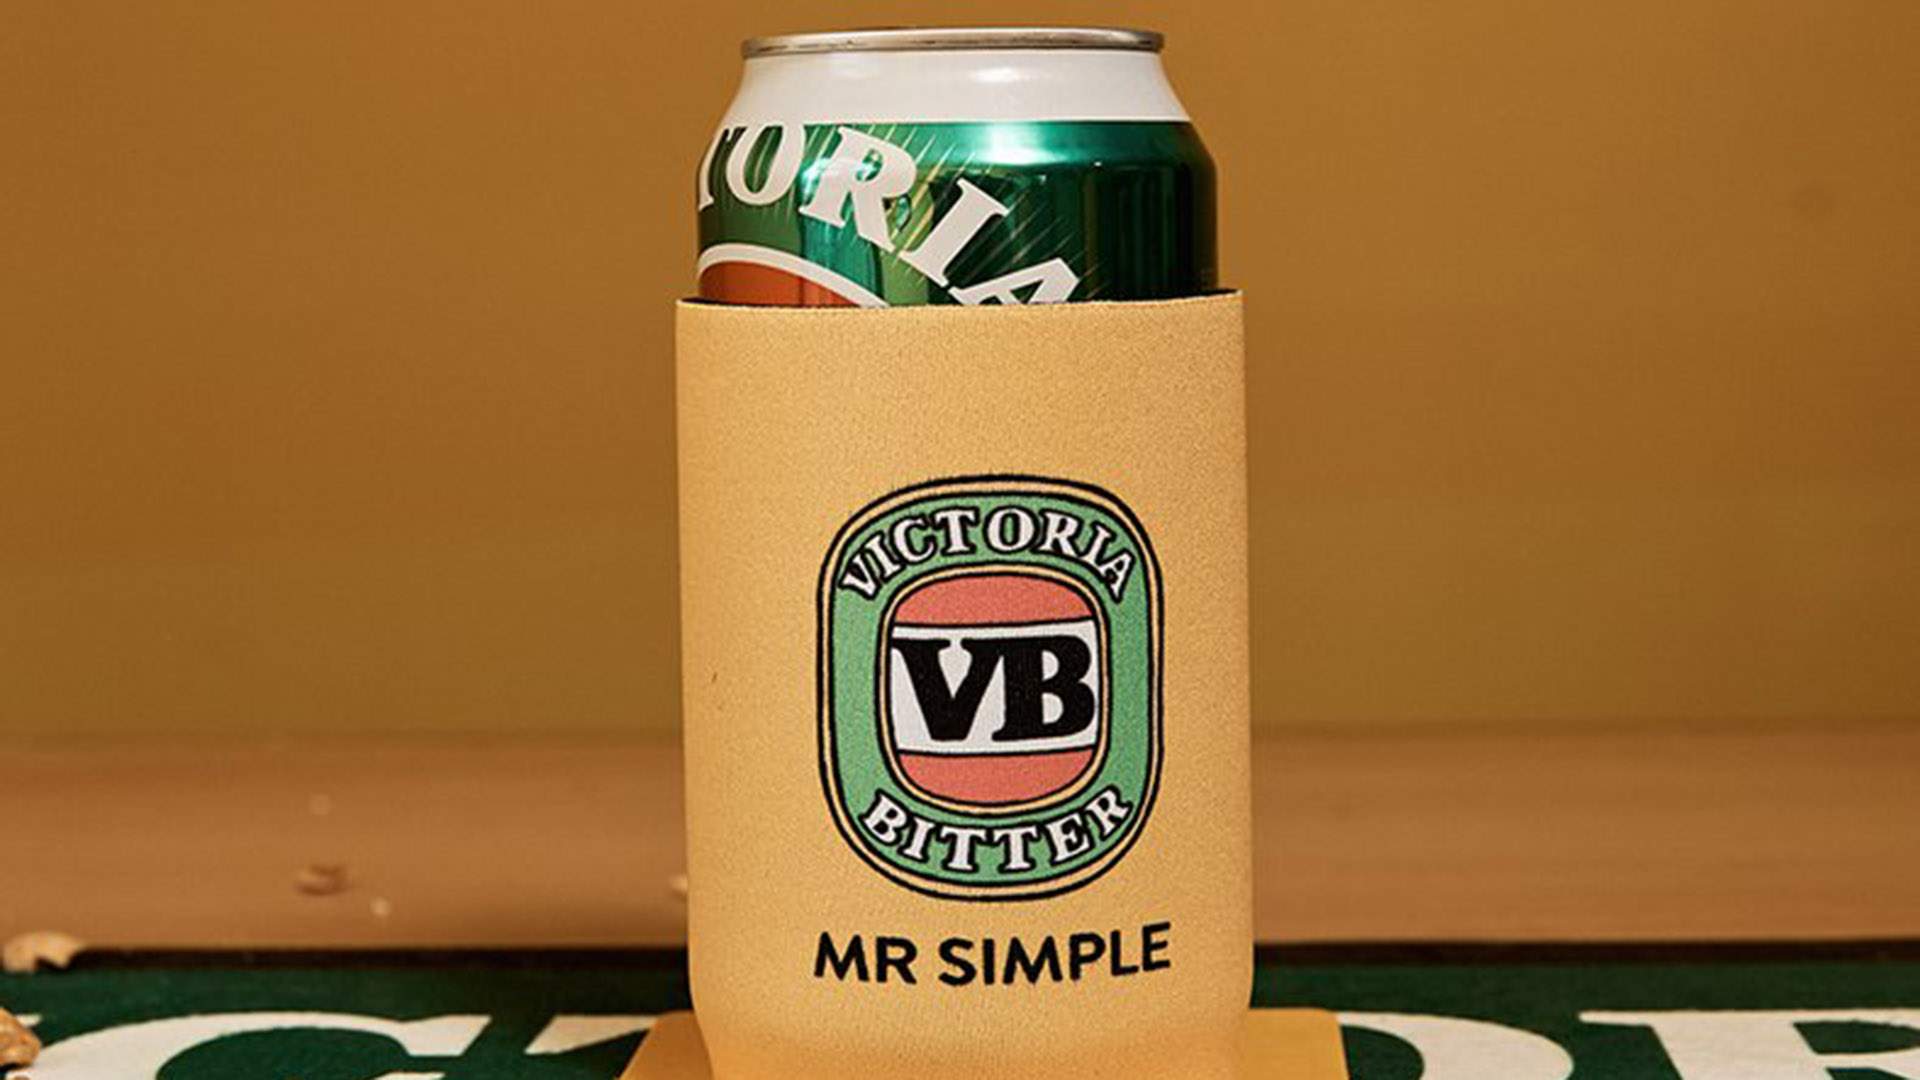 Victoria Bitter Has Teamed Up With Mr Simple on a New Line of Pop Art-Inspired Clothing and Merch